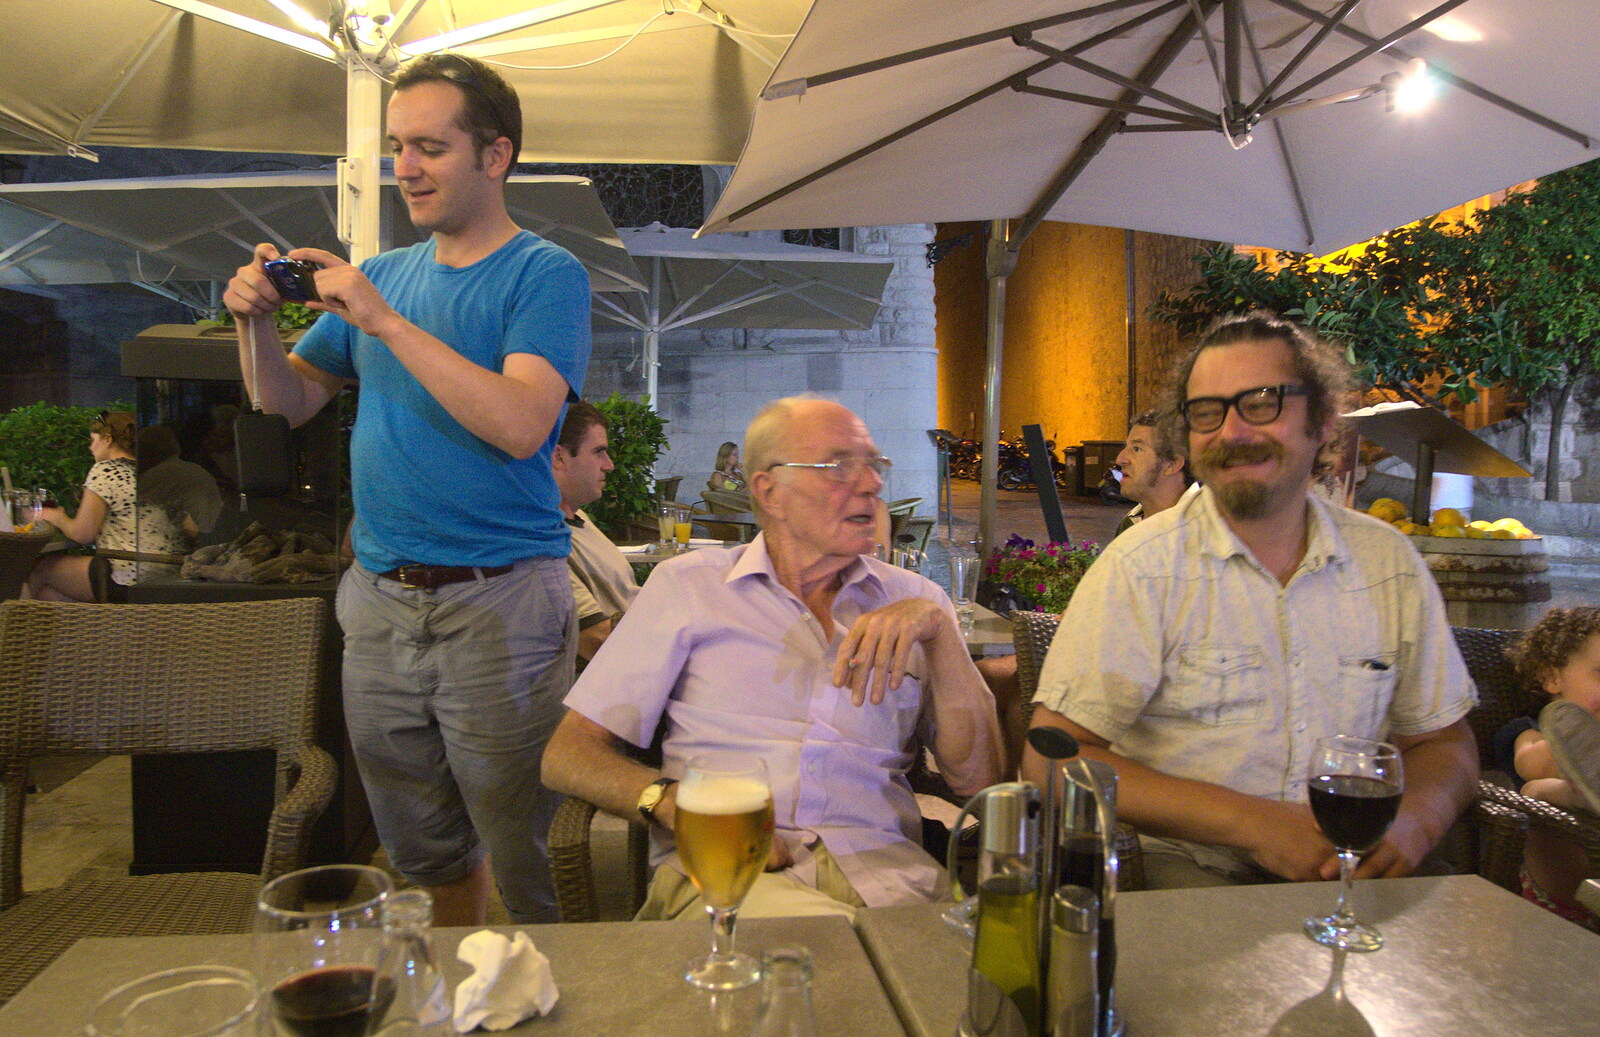 Jamie, Grandad and Noddy from A Trip to Sóller, Mallorca, Spain - 8th-14th September 2012